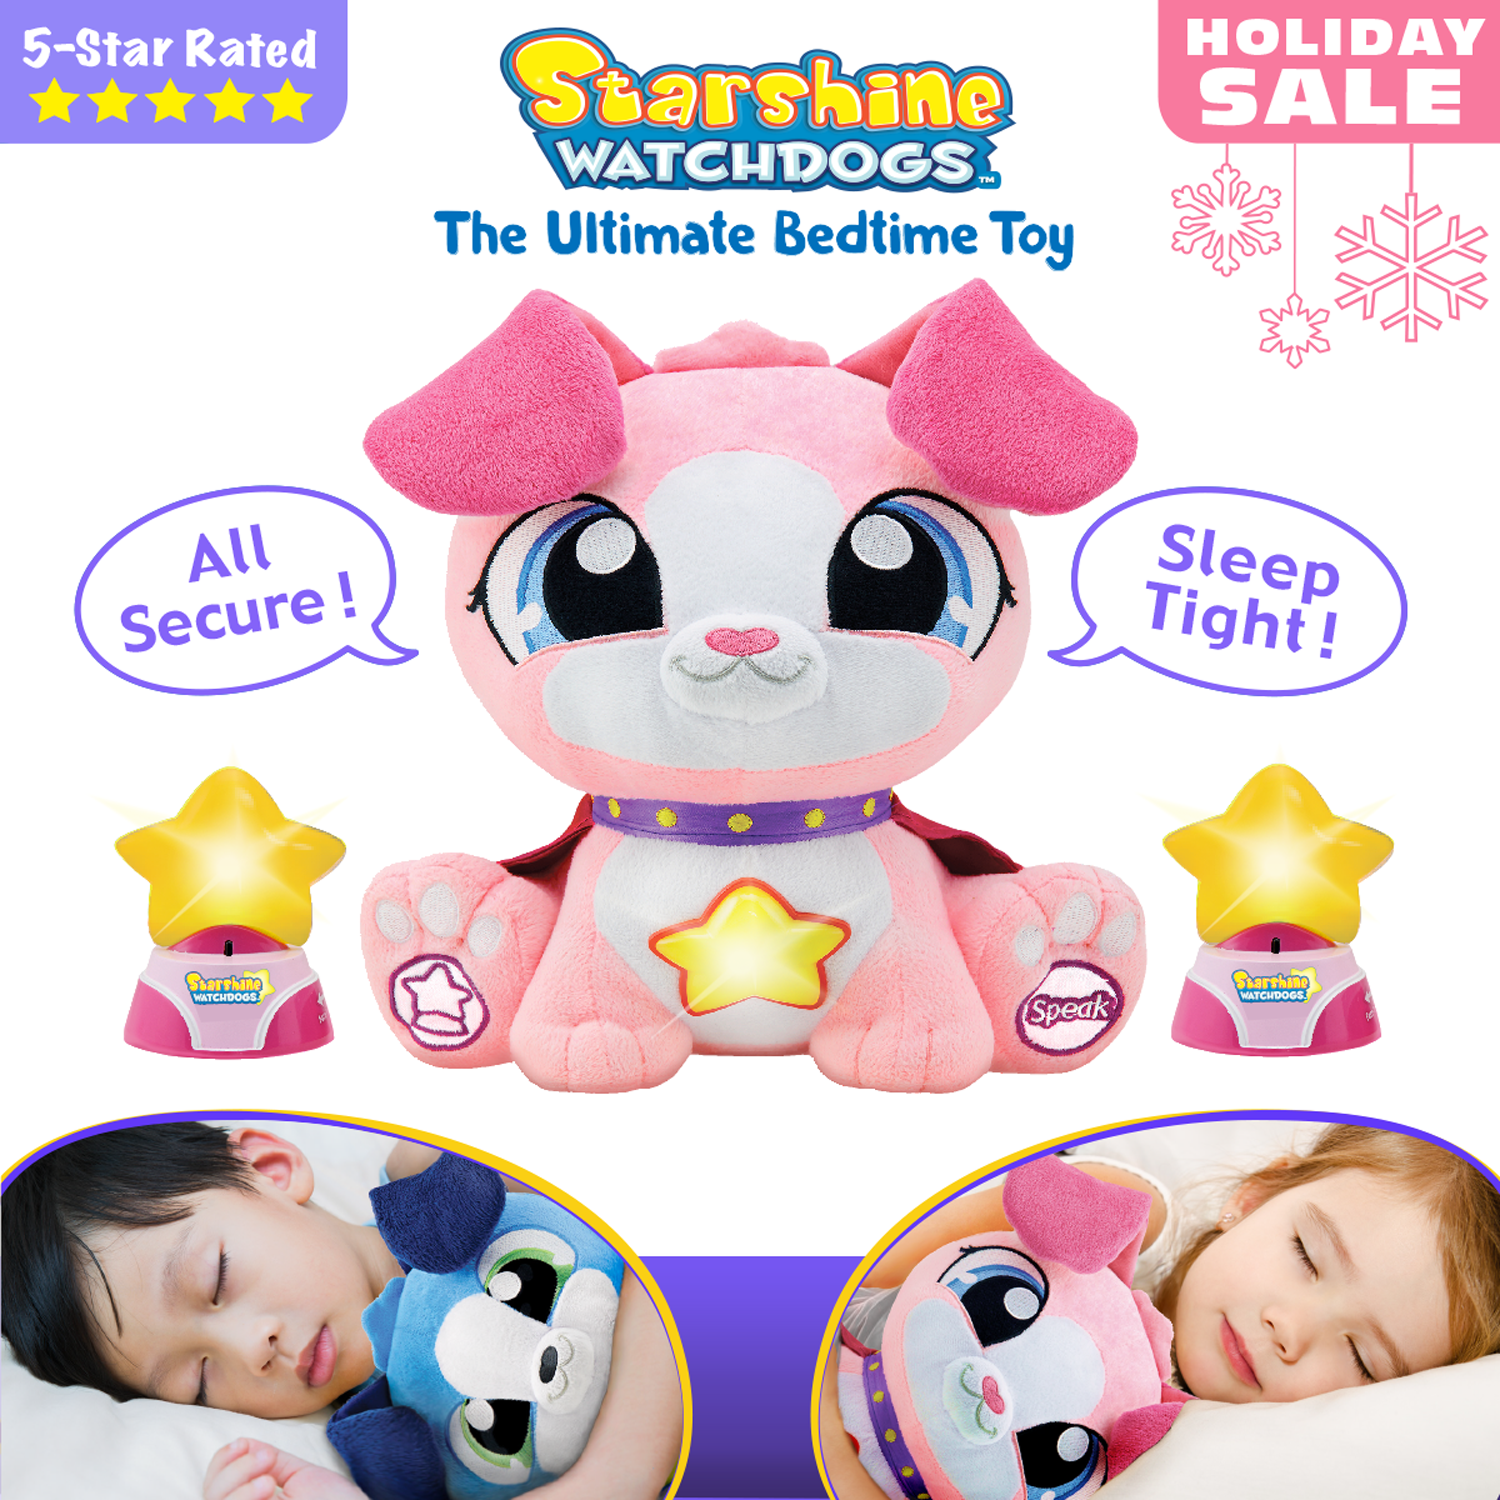 Pink Remote Control Children's Night-Lights 4pc Ready-for-Bed Set Remote Control Childrens Night-Lights Comforting Phrases Starshine Watchdogs Skye Talking Stuffed Animal Nighttime Toy Calming Story Book Plus Free Coloring Pages